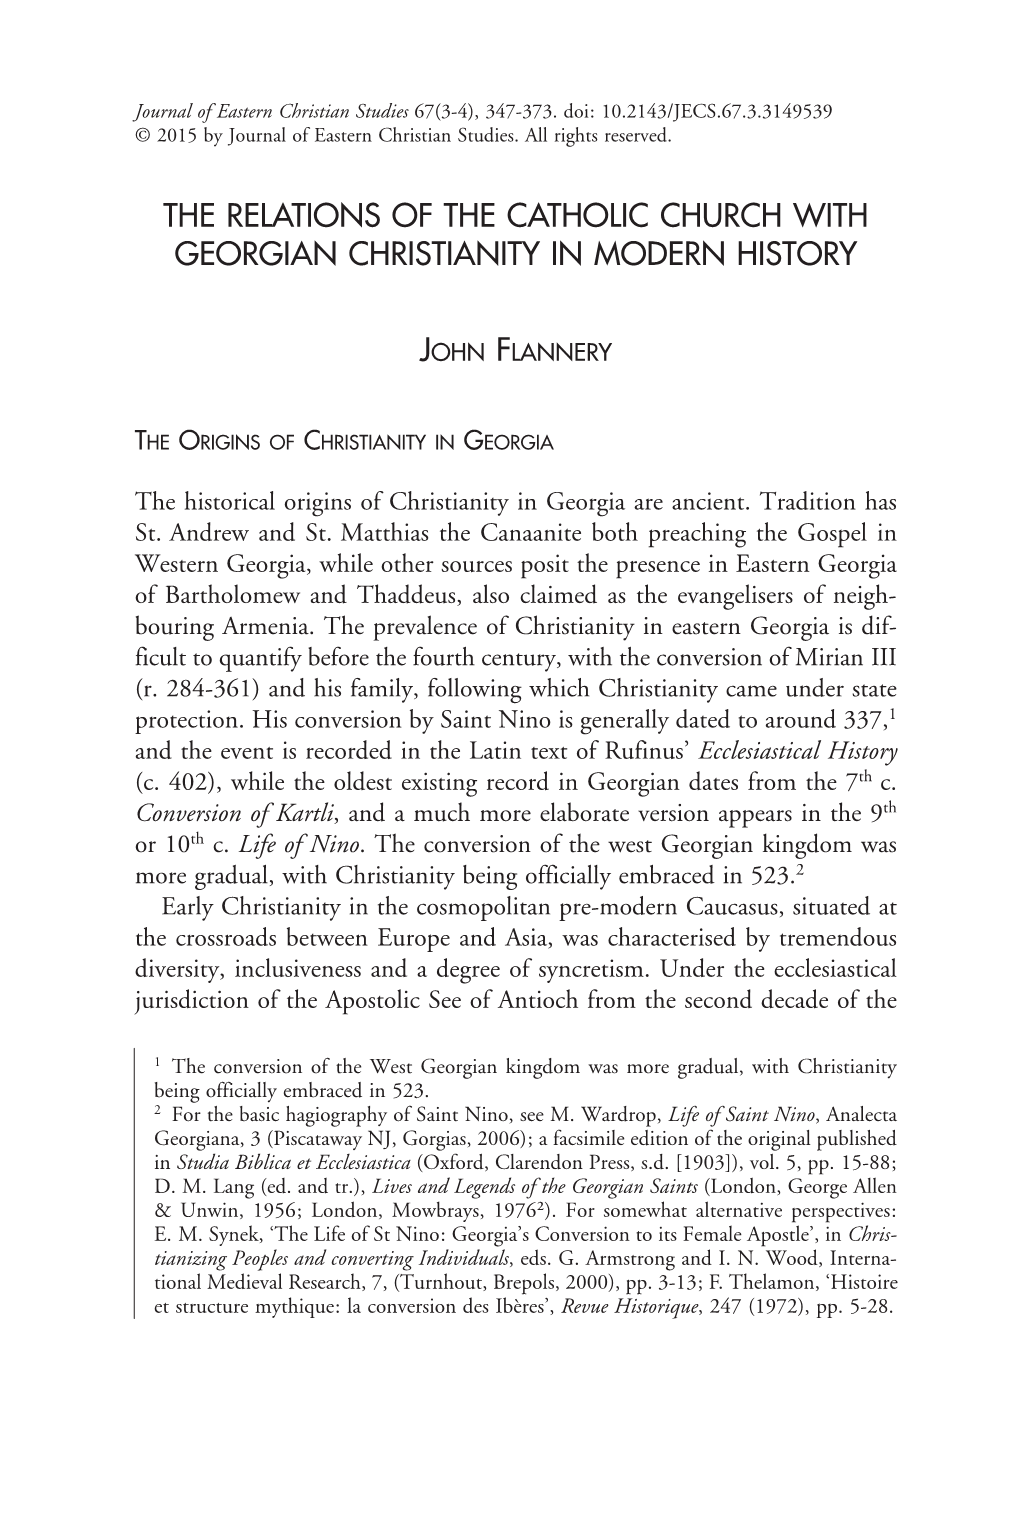 The Relations of the Catholic Church with Georgian Christianity in Modern History